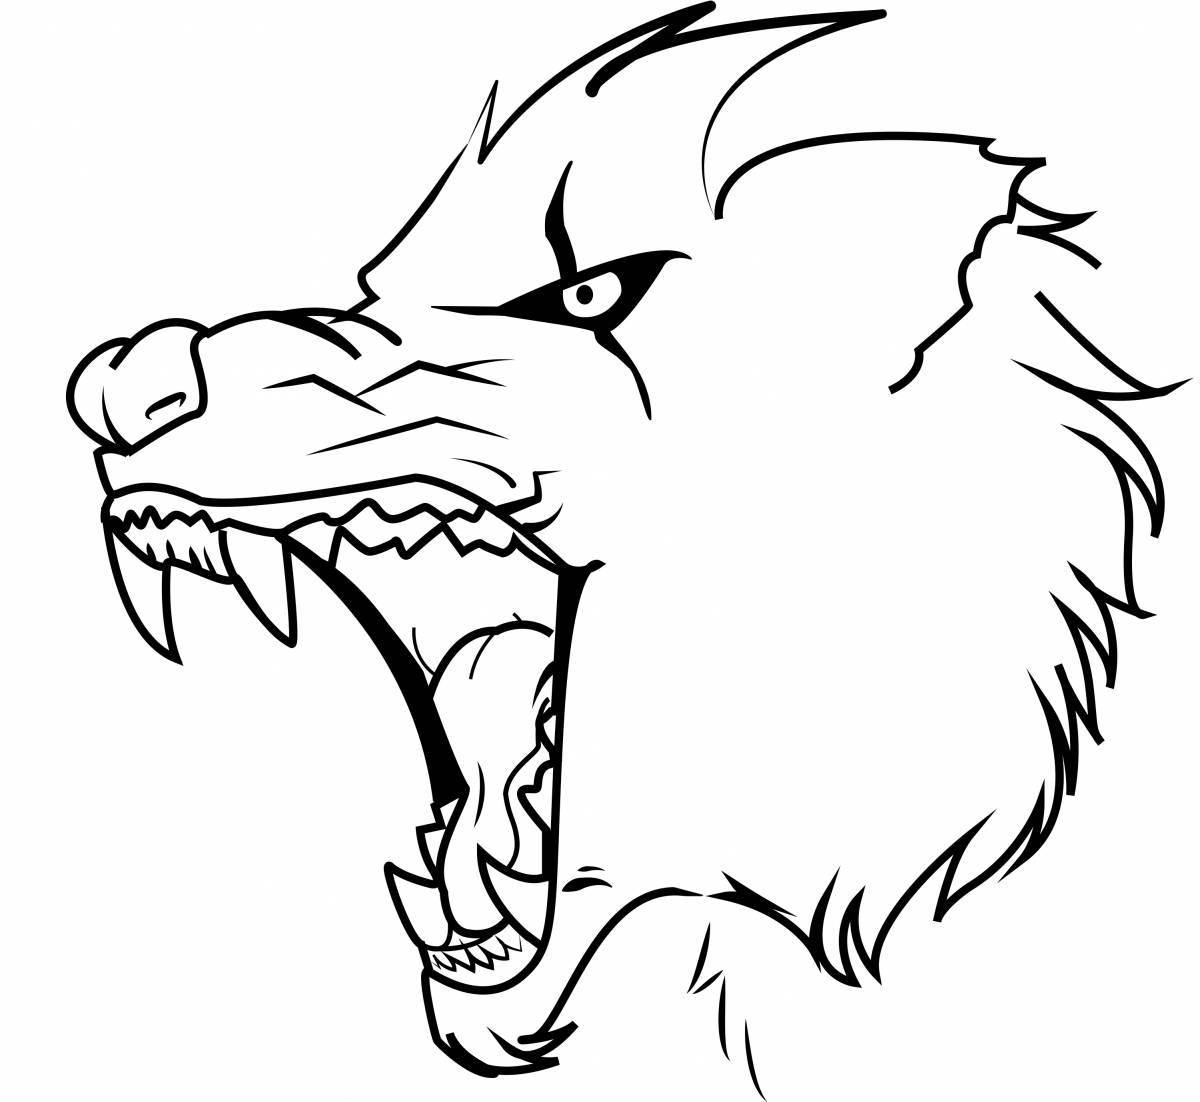 Dangerous bad wolf coloring page